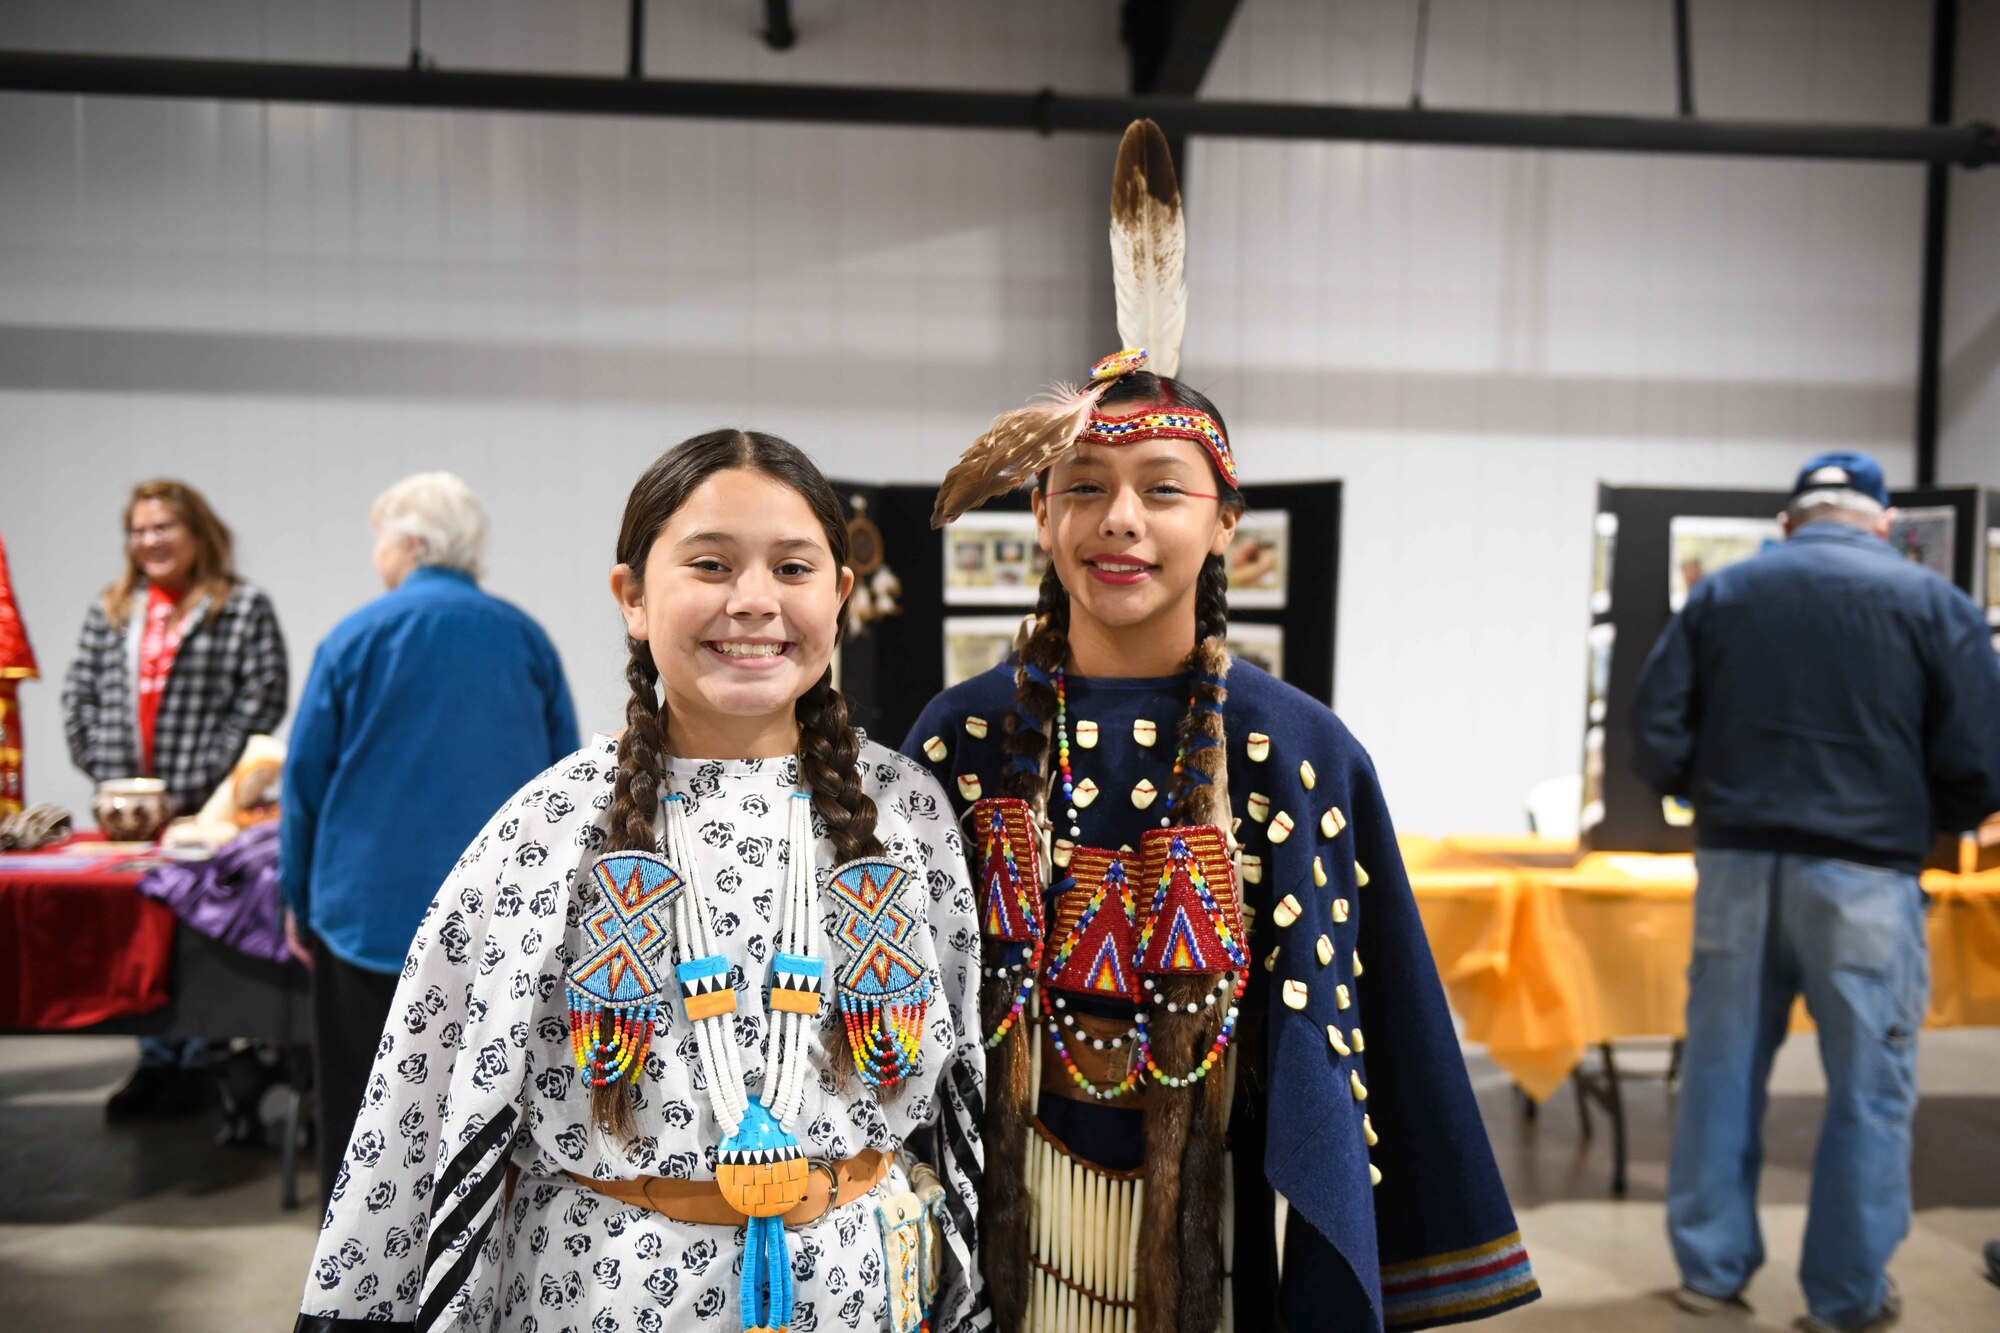 Naima Aiaitson and Bella Portillo, performers with Comanche Nation Youth Dancers, pose for a photo in front of poster boards at the Jackson County Expo Center Nov. 19, 2022 in Altus, Oklahoma. The outfits the dancers wear are all homemade and reflect their heritage with the Comanche Nation. (U.S. Air Force photo by Airman 1st Class Kari Degraffenreed)